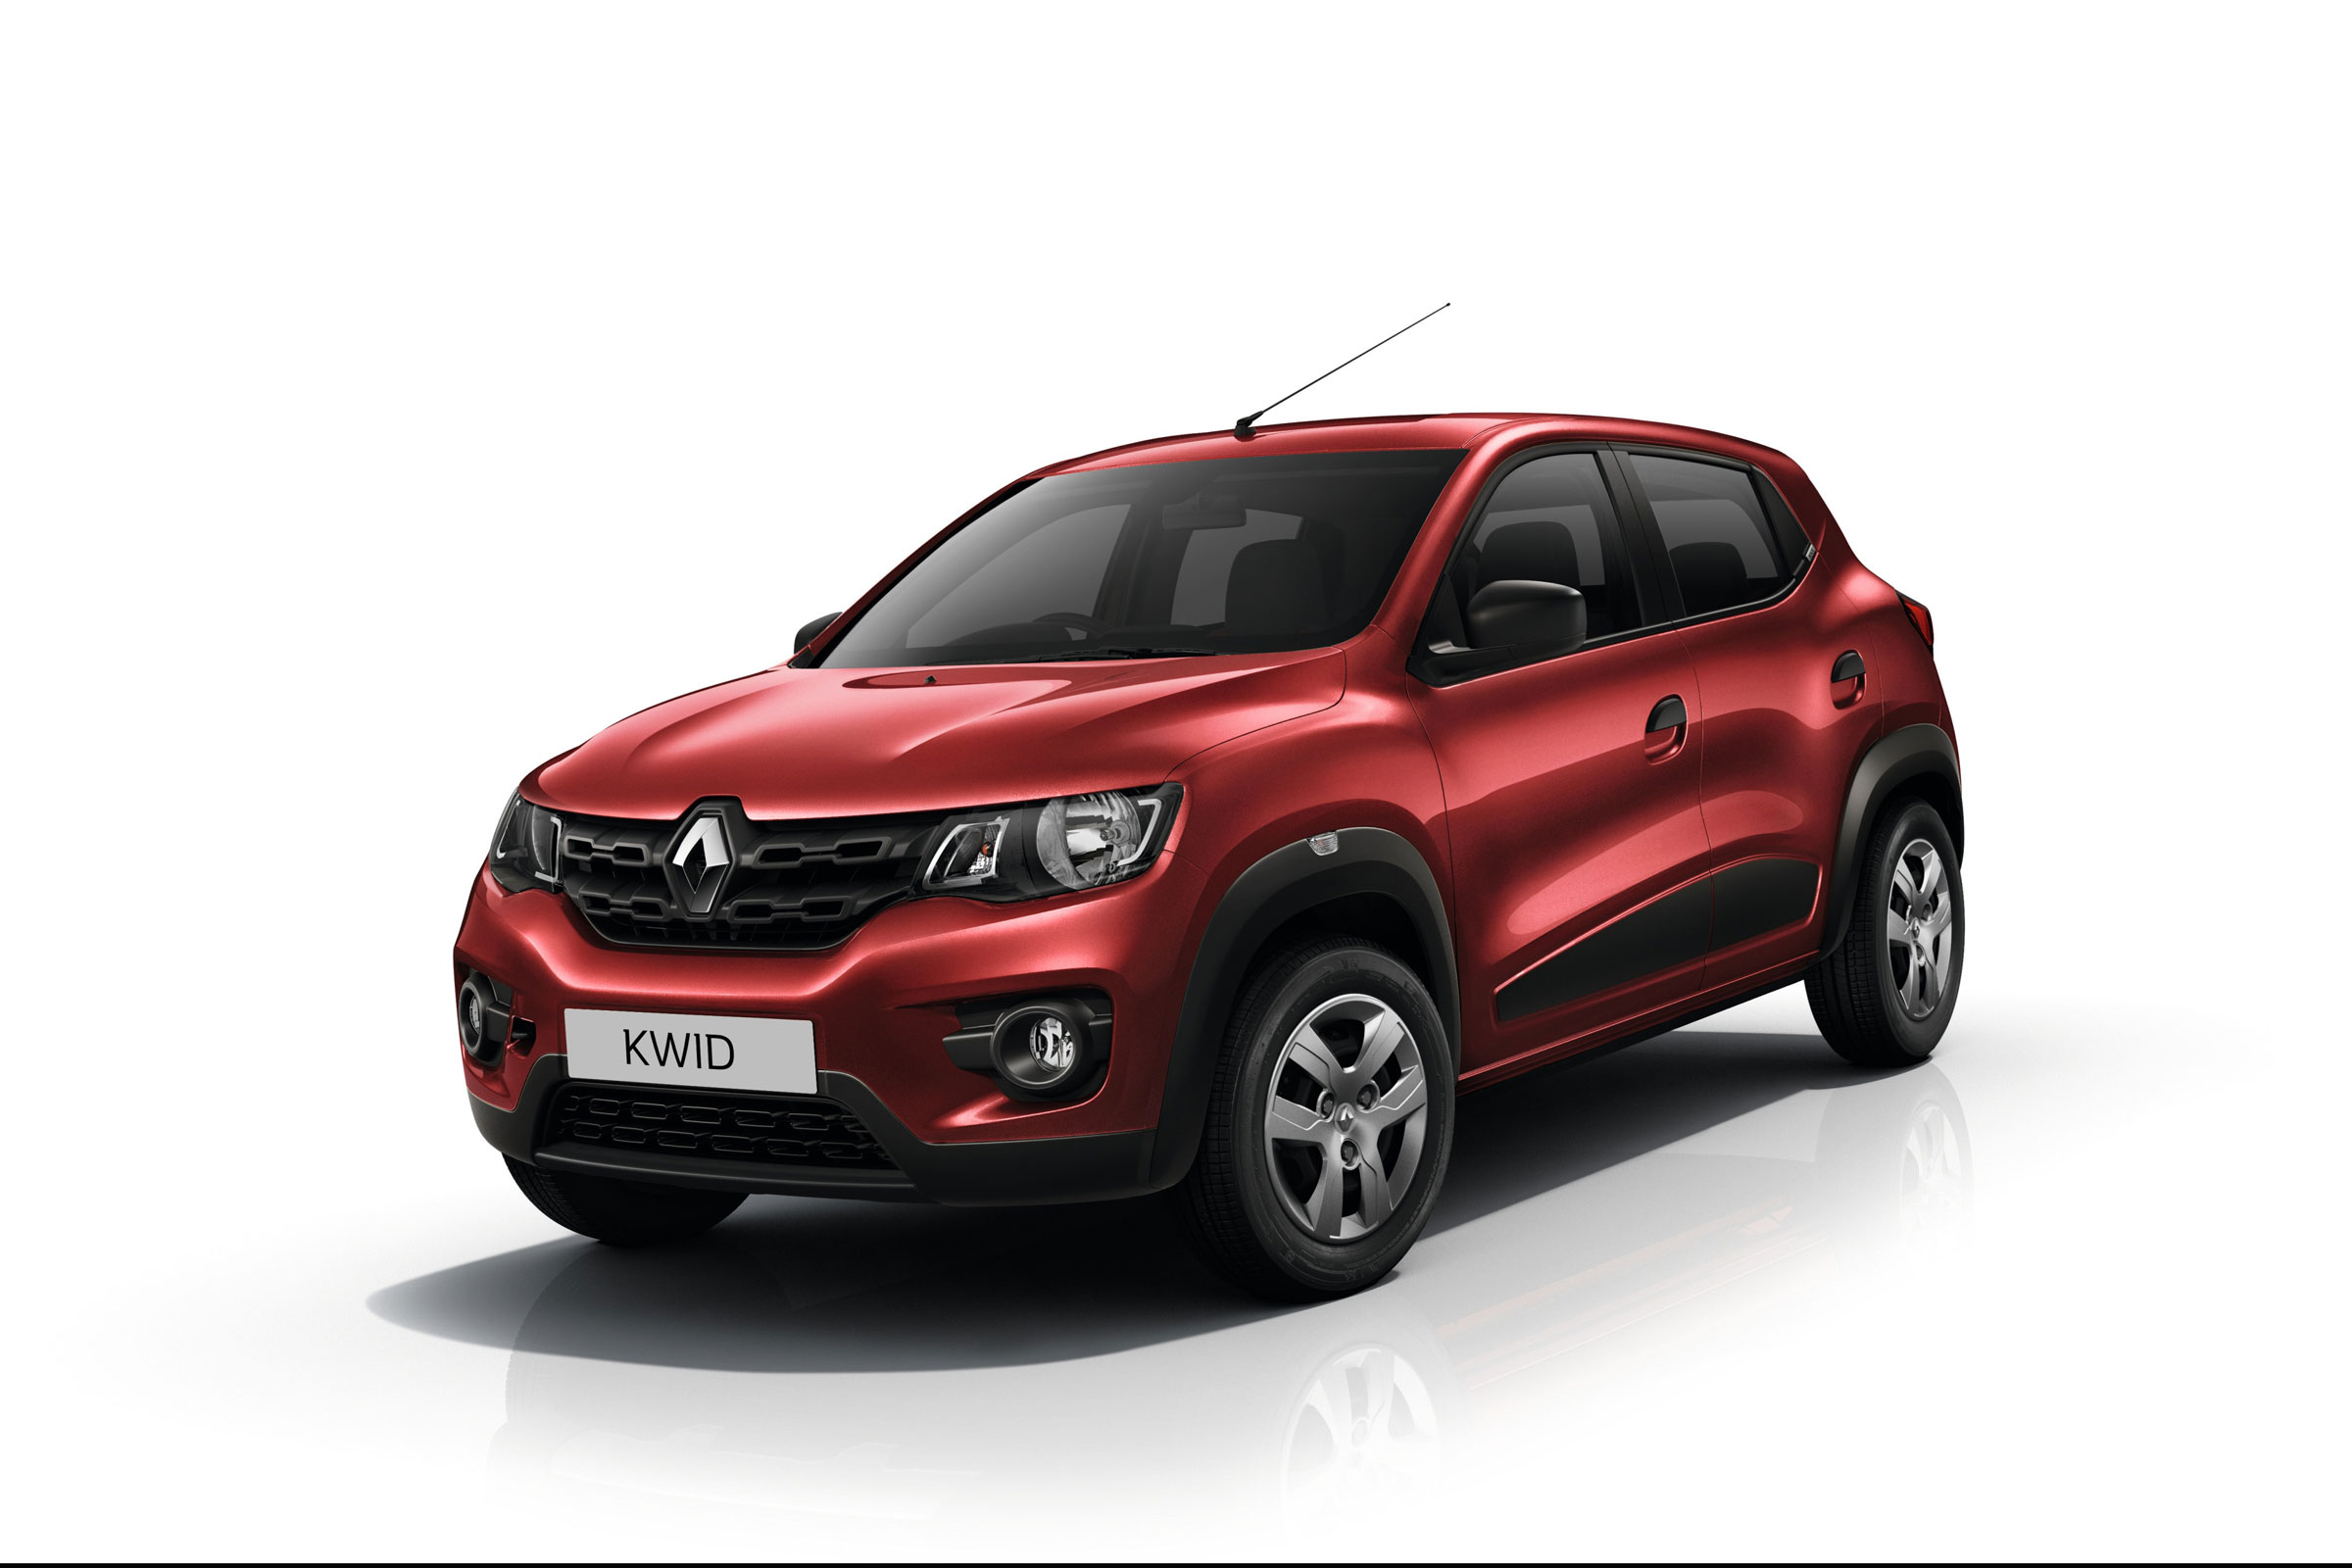 Give us a Kwid: new Renault Kwid city car crossover revealed | Auto Express